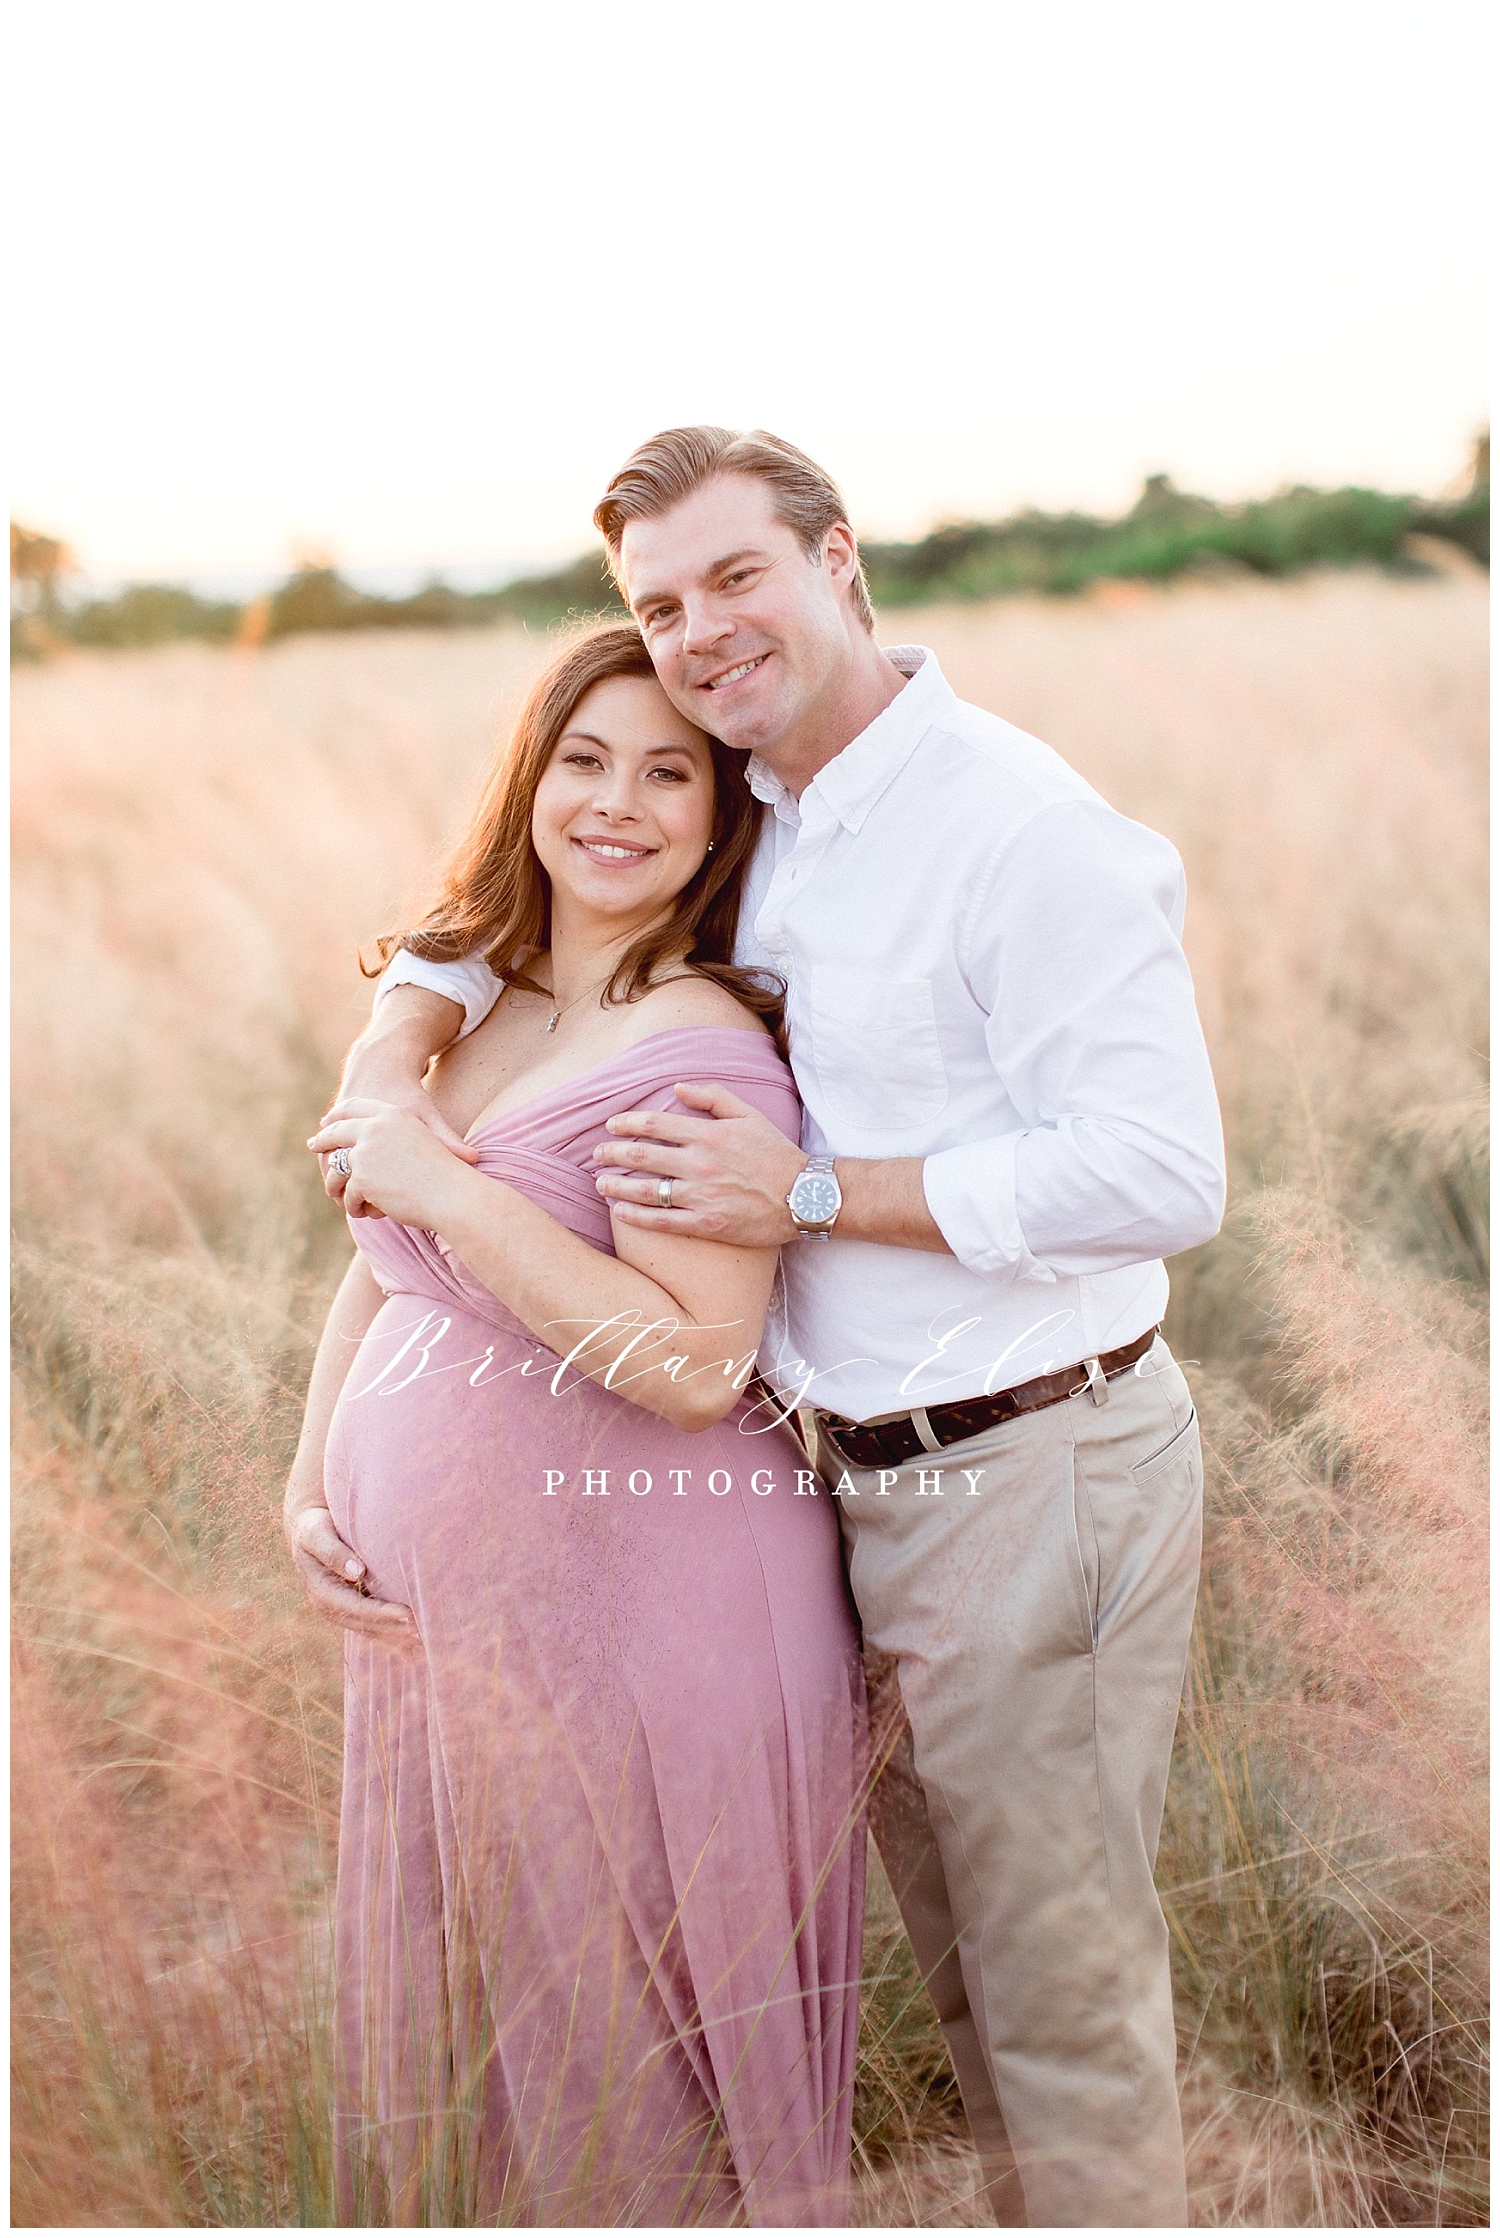 Tampa Family Outdoor Maternity Photographer